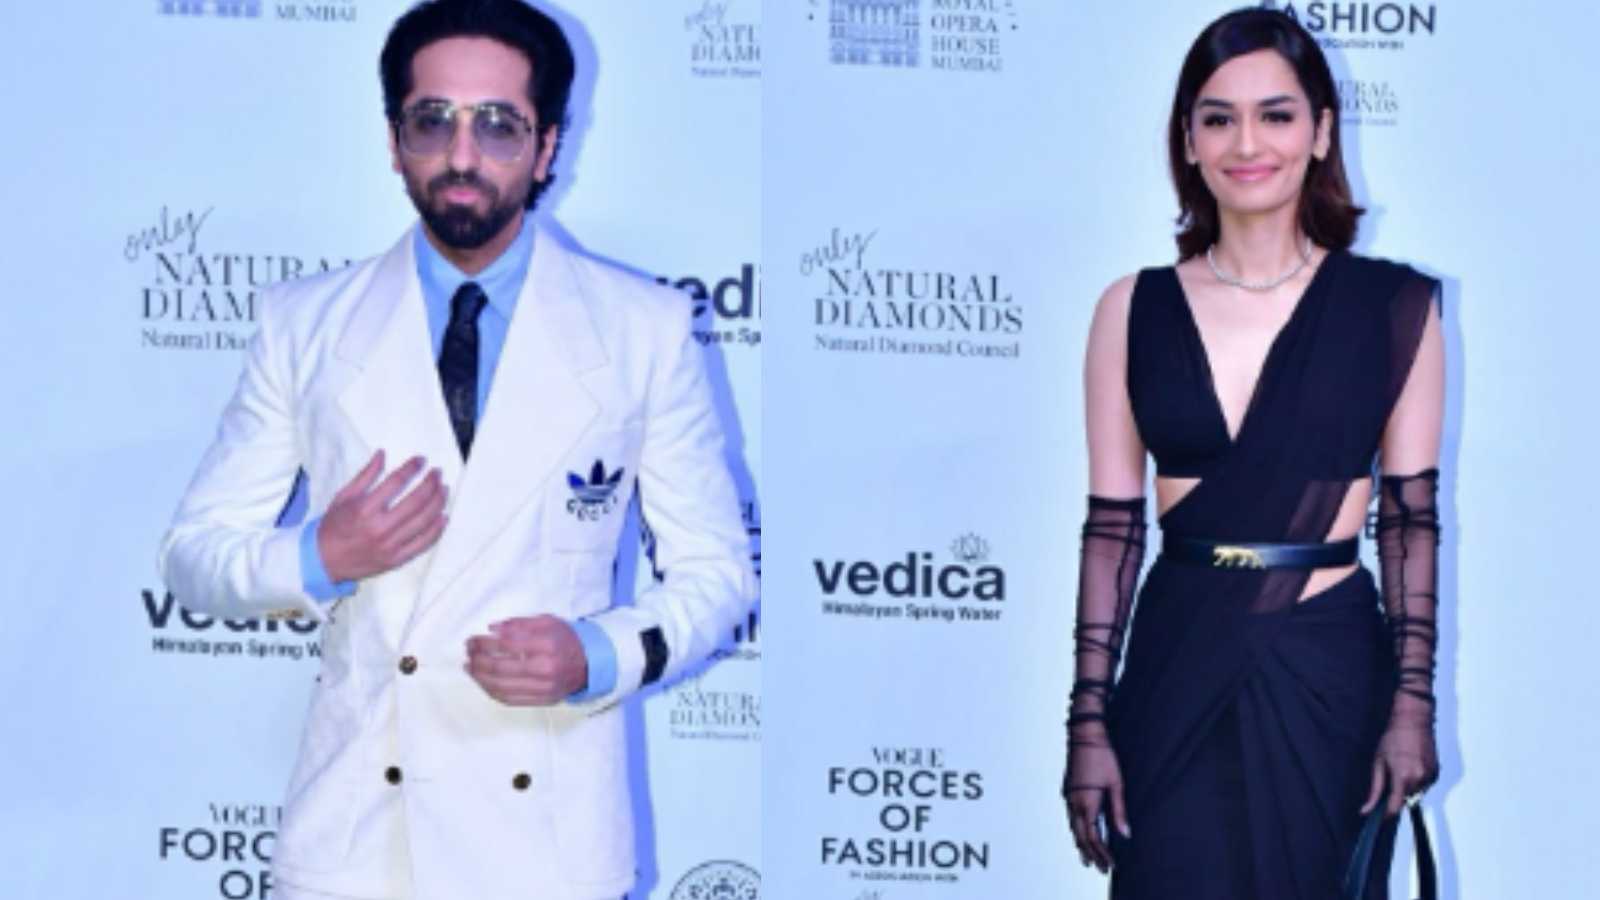 Ayushmann Khurrana, Manushi Chillar and others serve panache as they welcome fashion sensation Anna Wintour in India